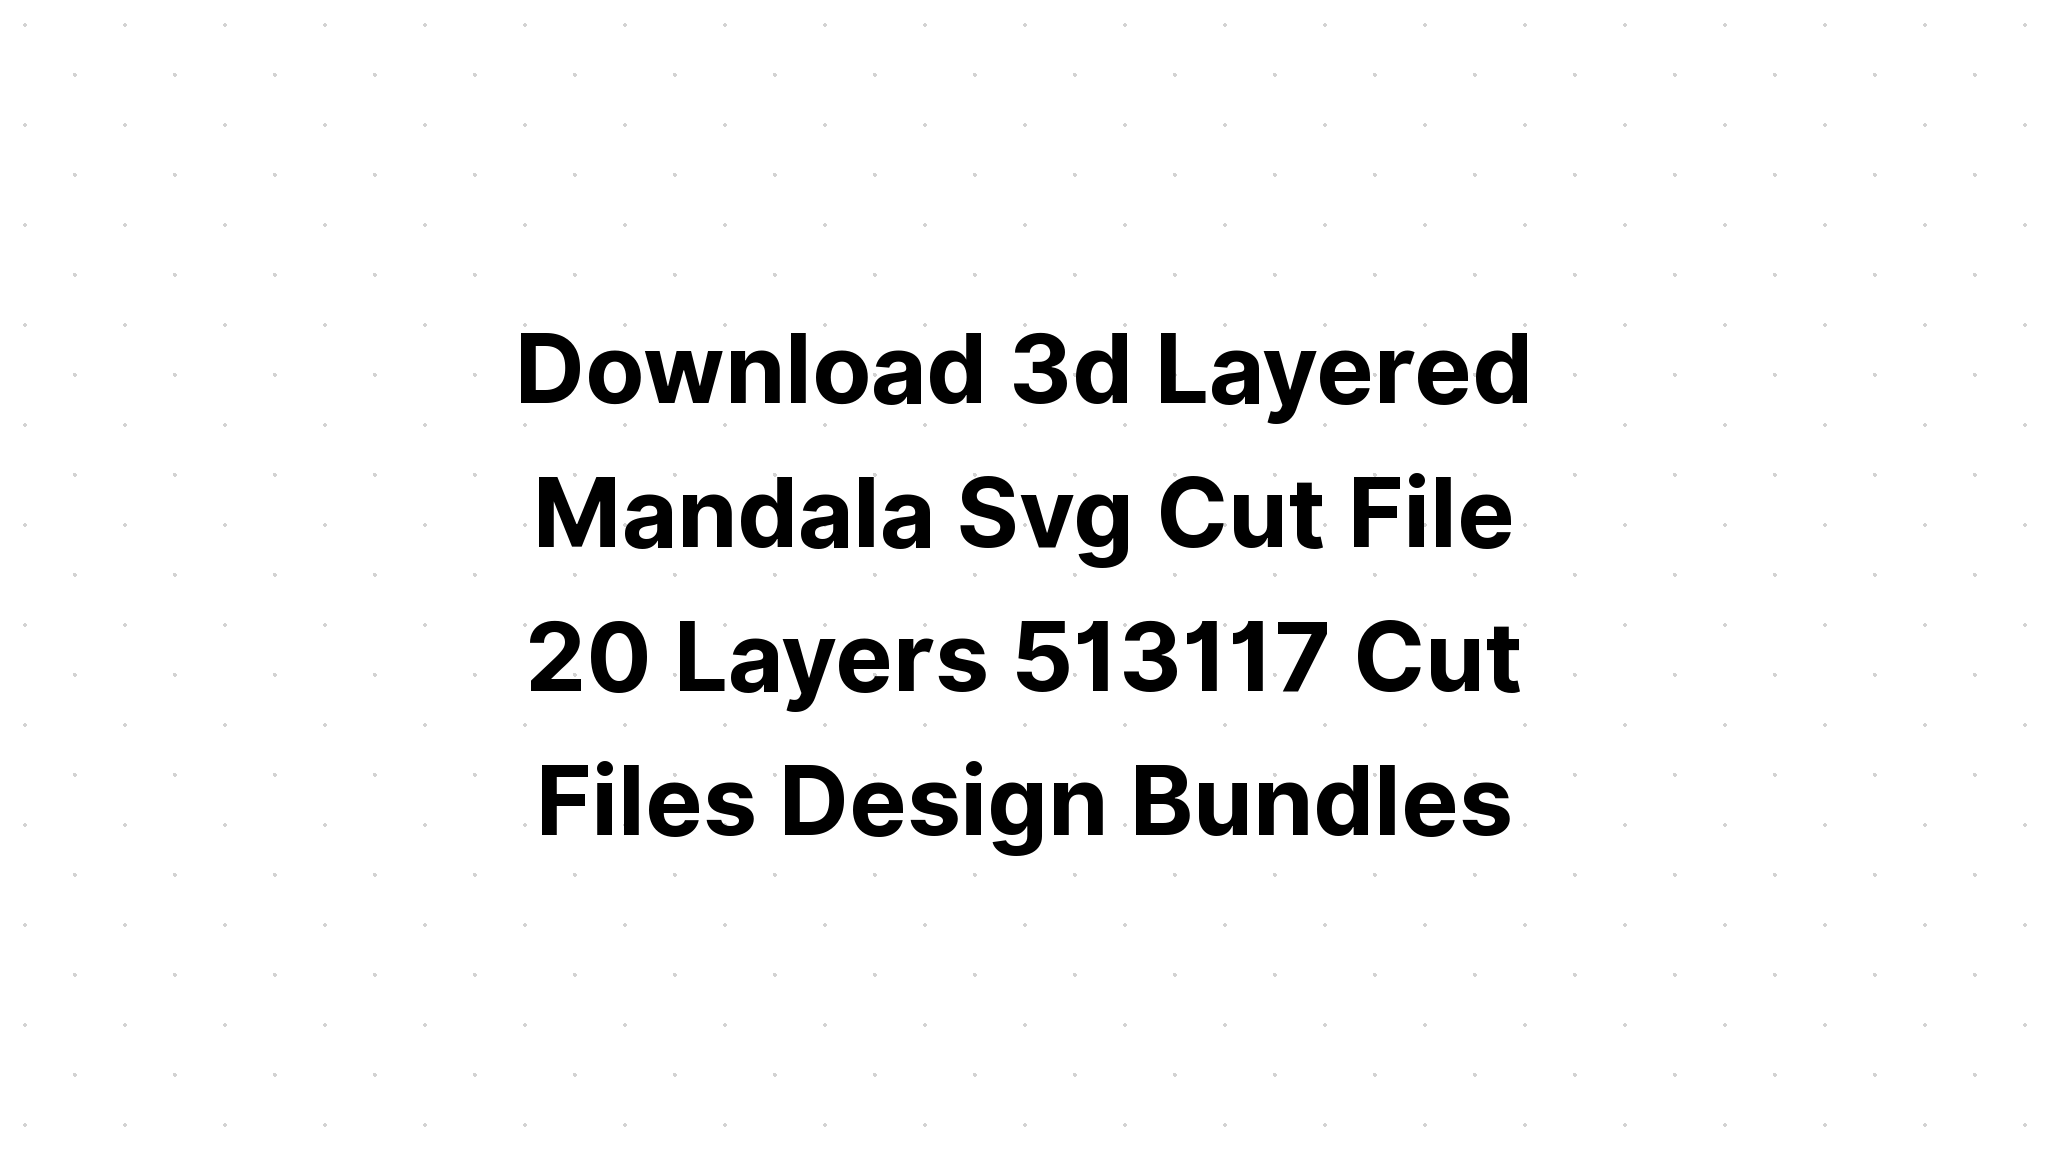 Download Multi Layered Svg Files For Silhouette - Layered SVG Cut File